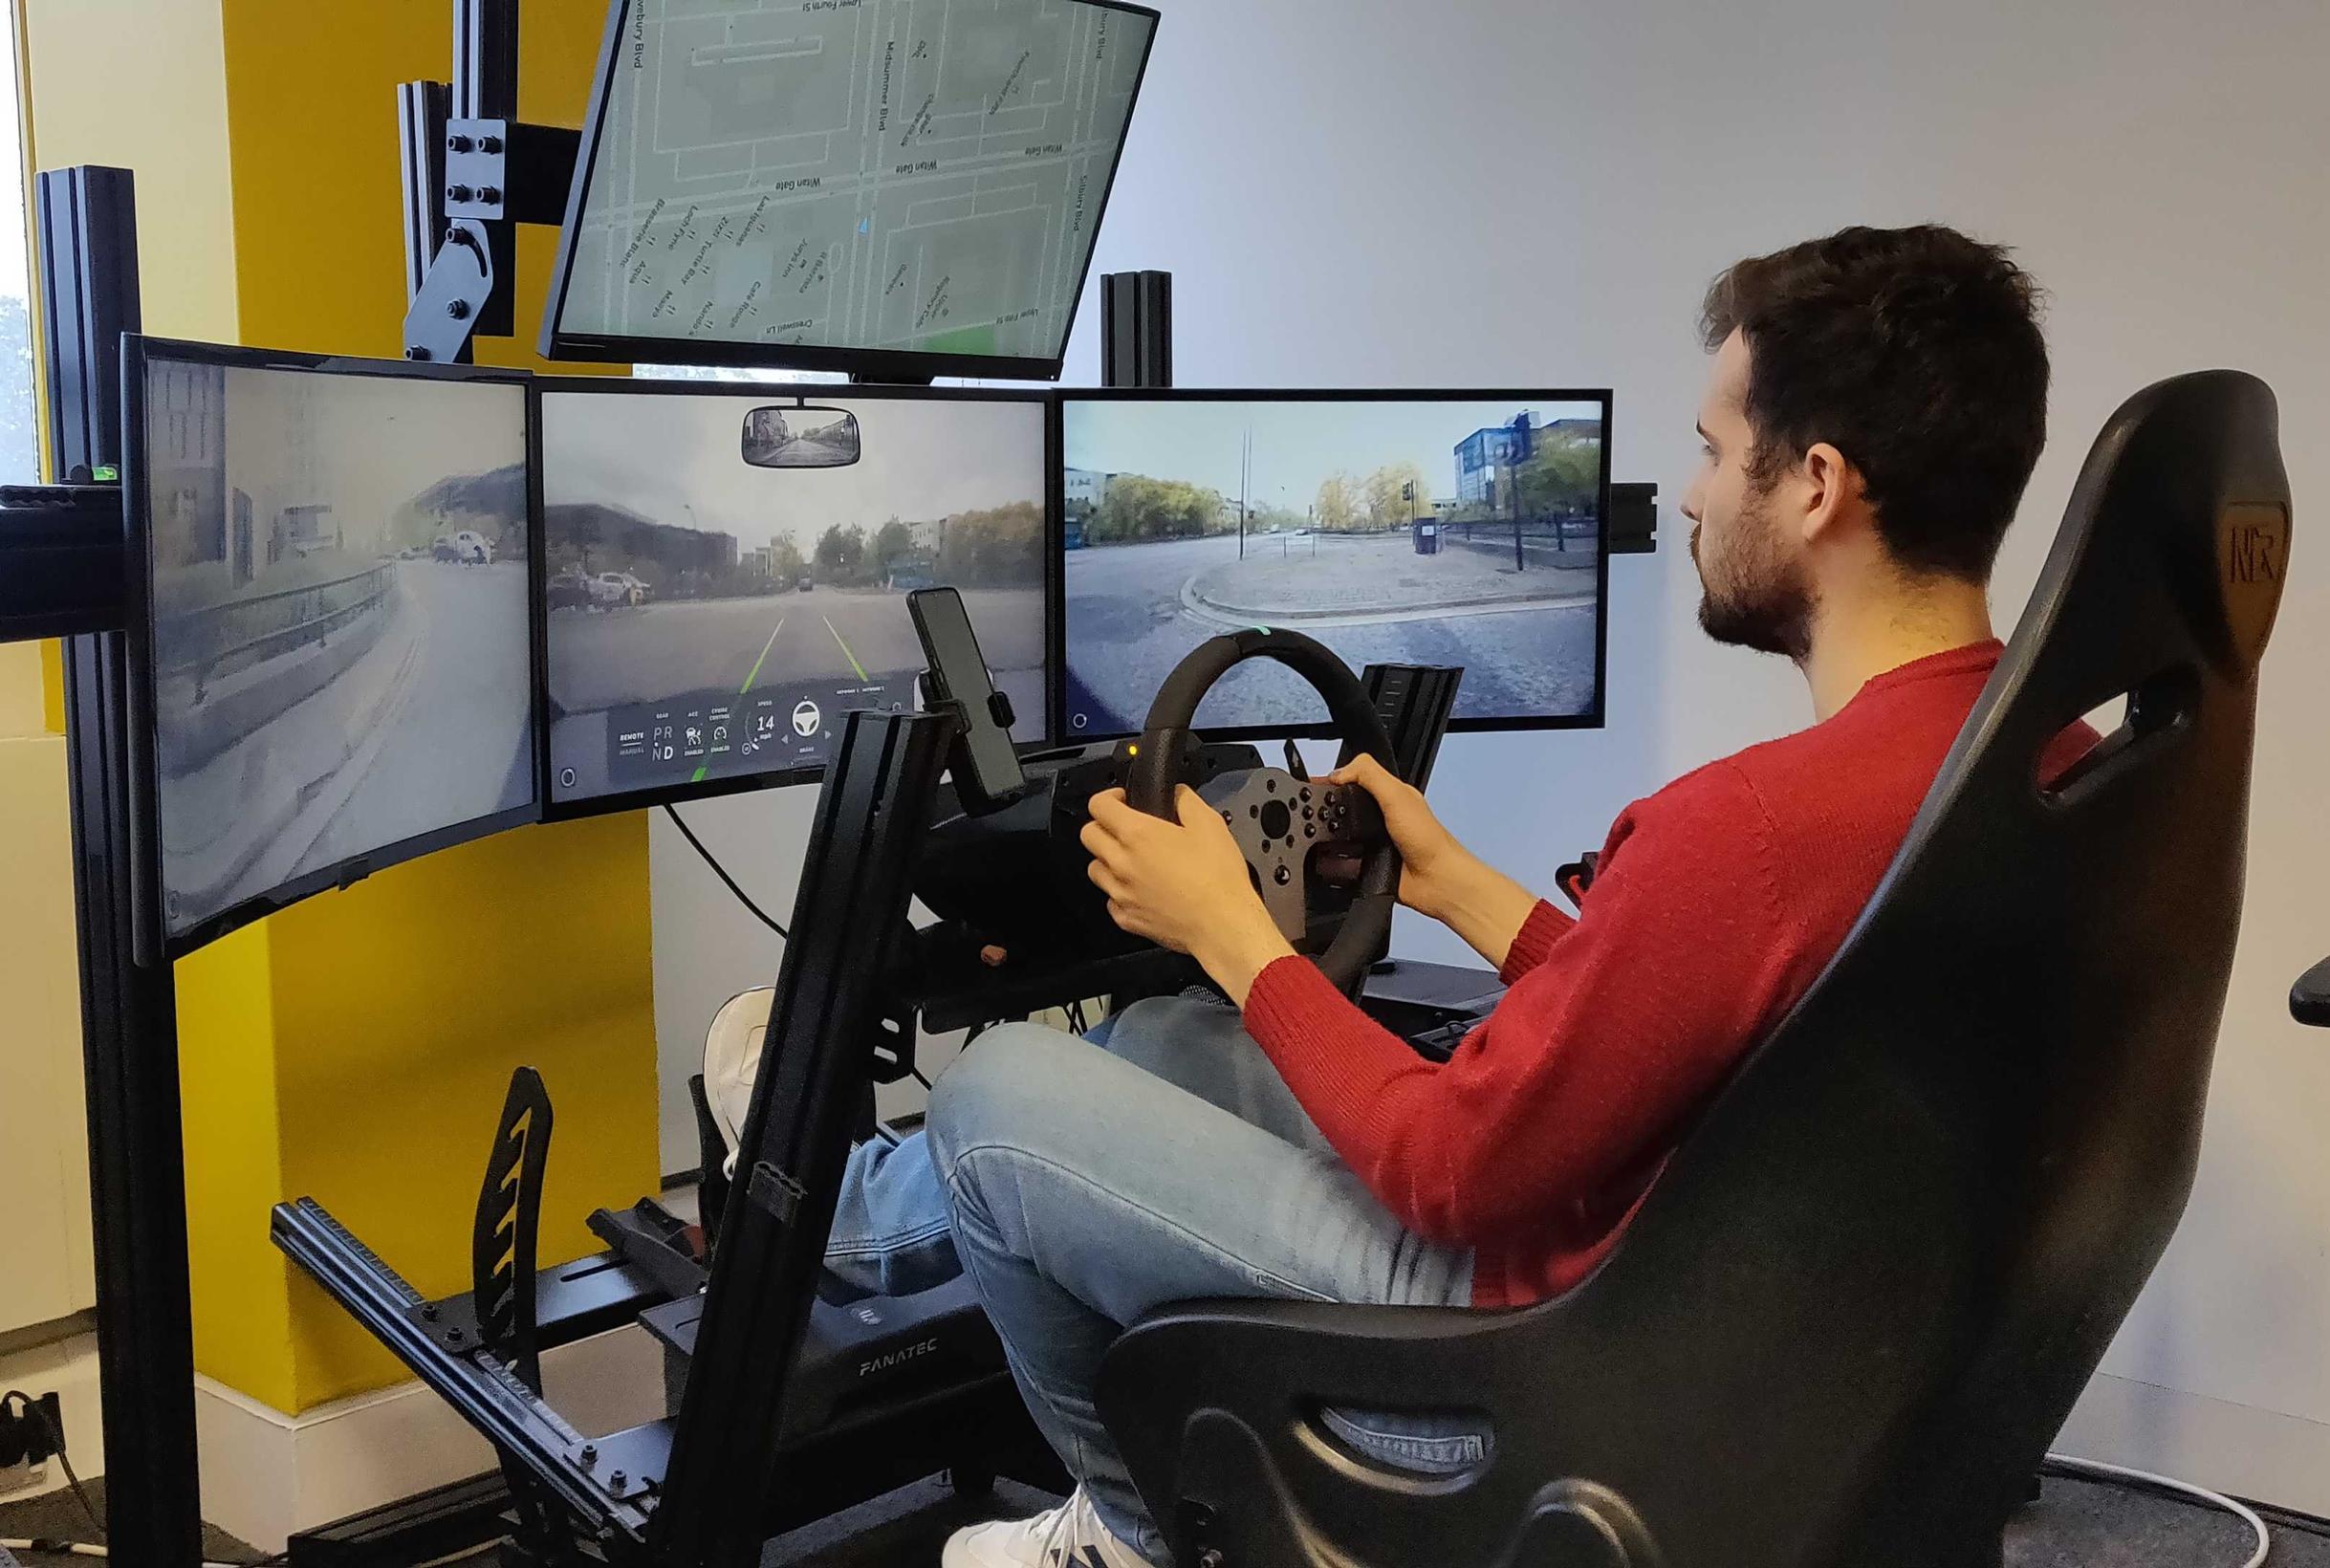 Imperium Drive’s system involves operators remotely controlling a driverless vehicle, directing it to the home of any resident living within a four-mile radius of Milton Keynes city centre